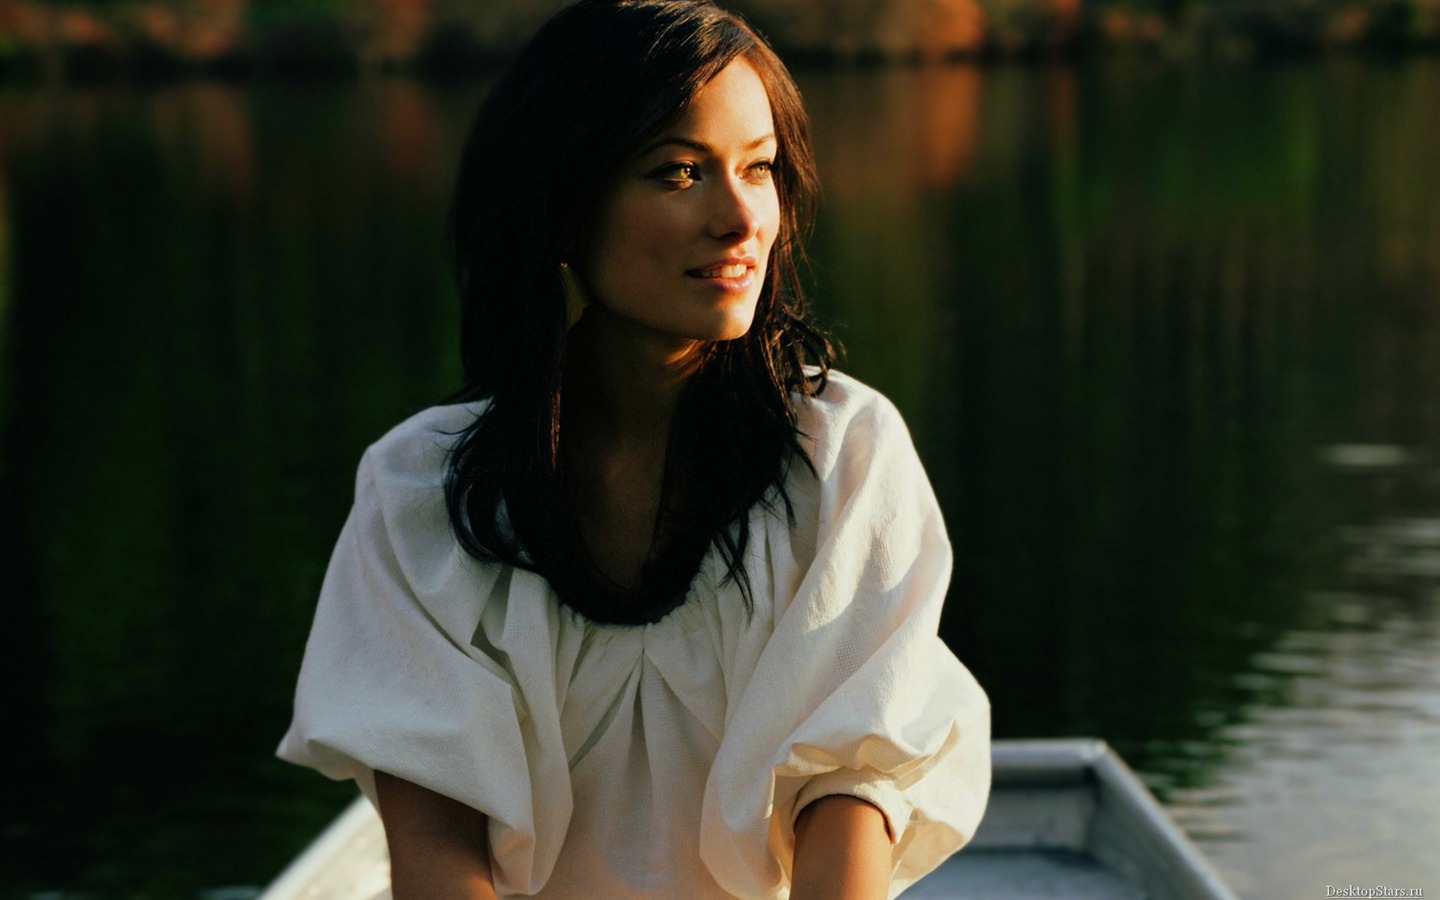 Olivia Wilde #019 - 1440x900 Wallpapers Pictures Photos Images